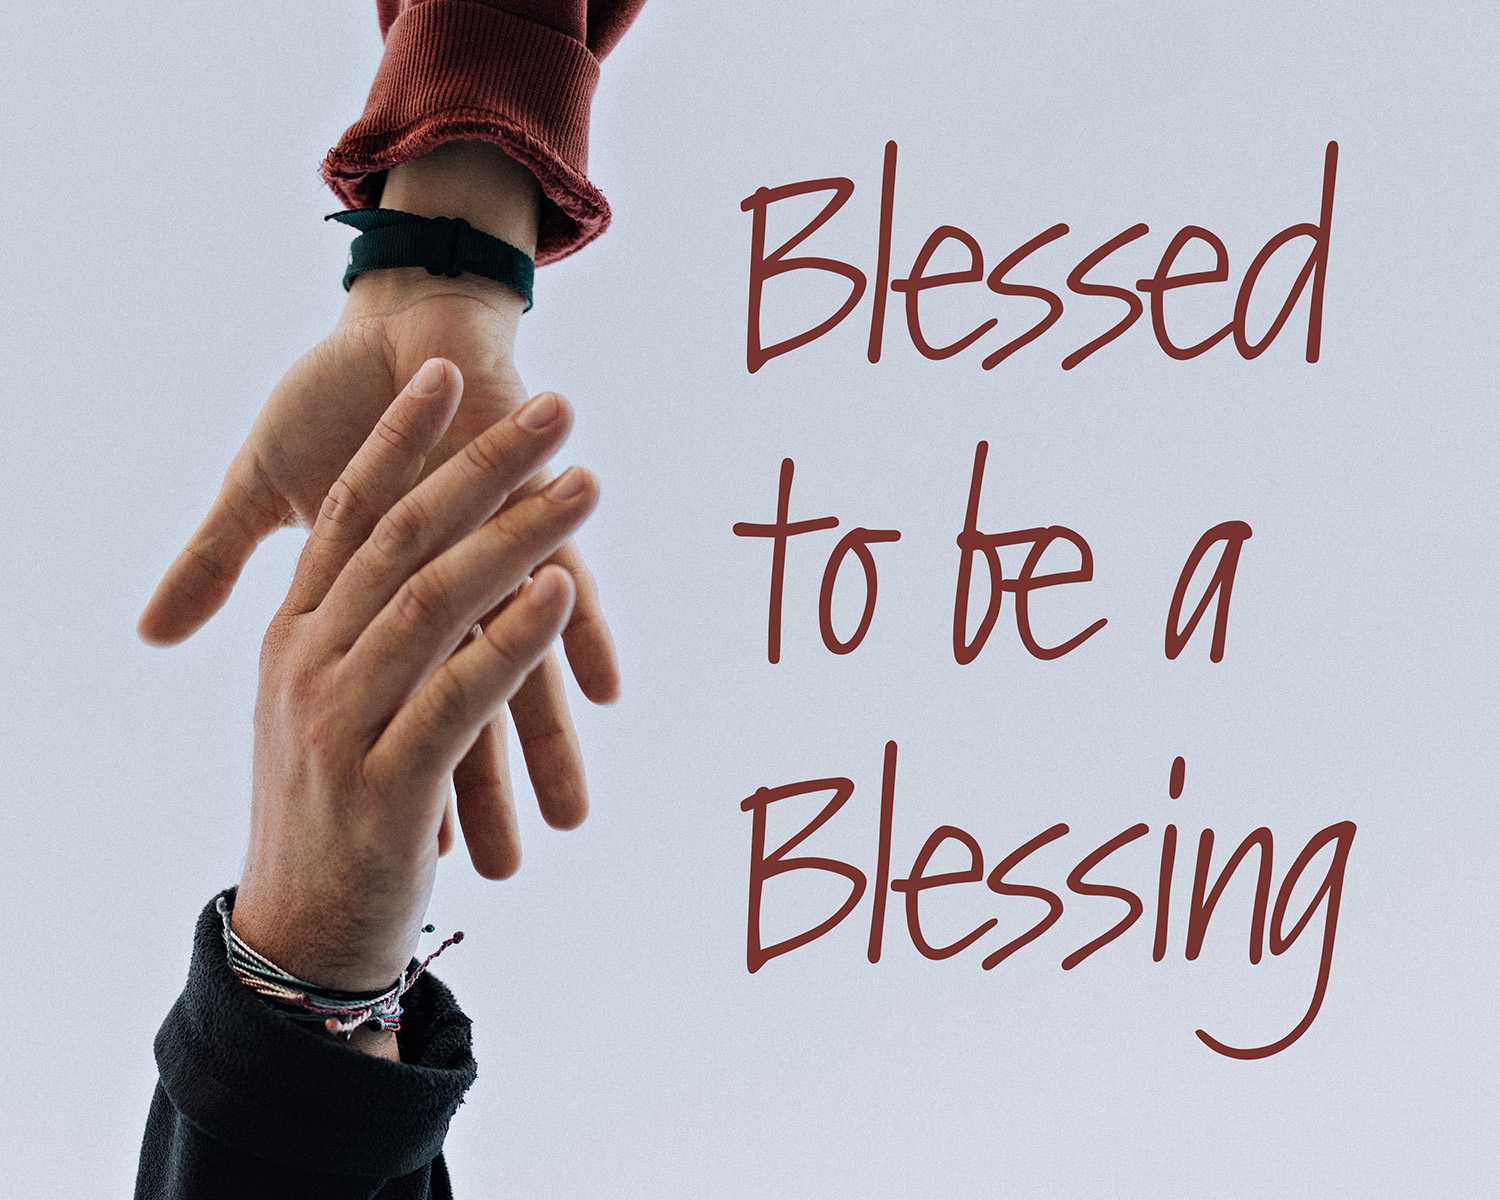 Blessed to be a Blessing, Discover Your Gifts, visual for Faith Lutheran Church of McLean County includes text and photo of one person's hand reaching for hand of another